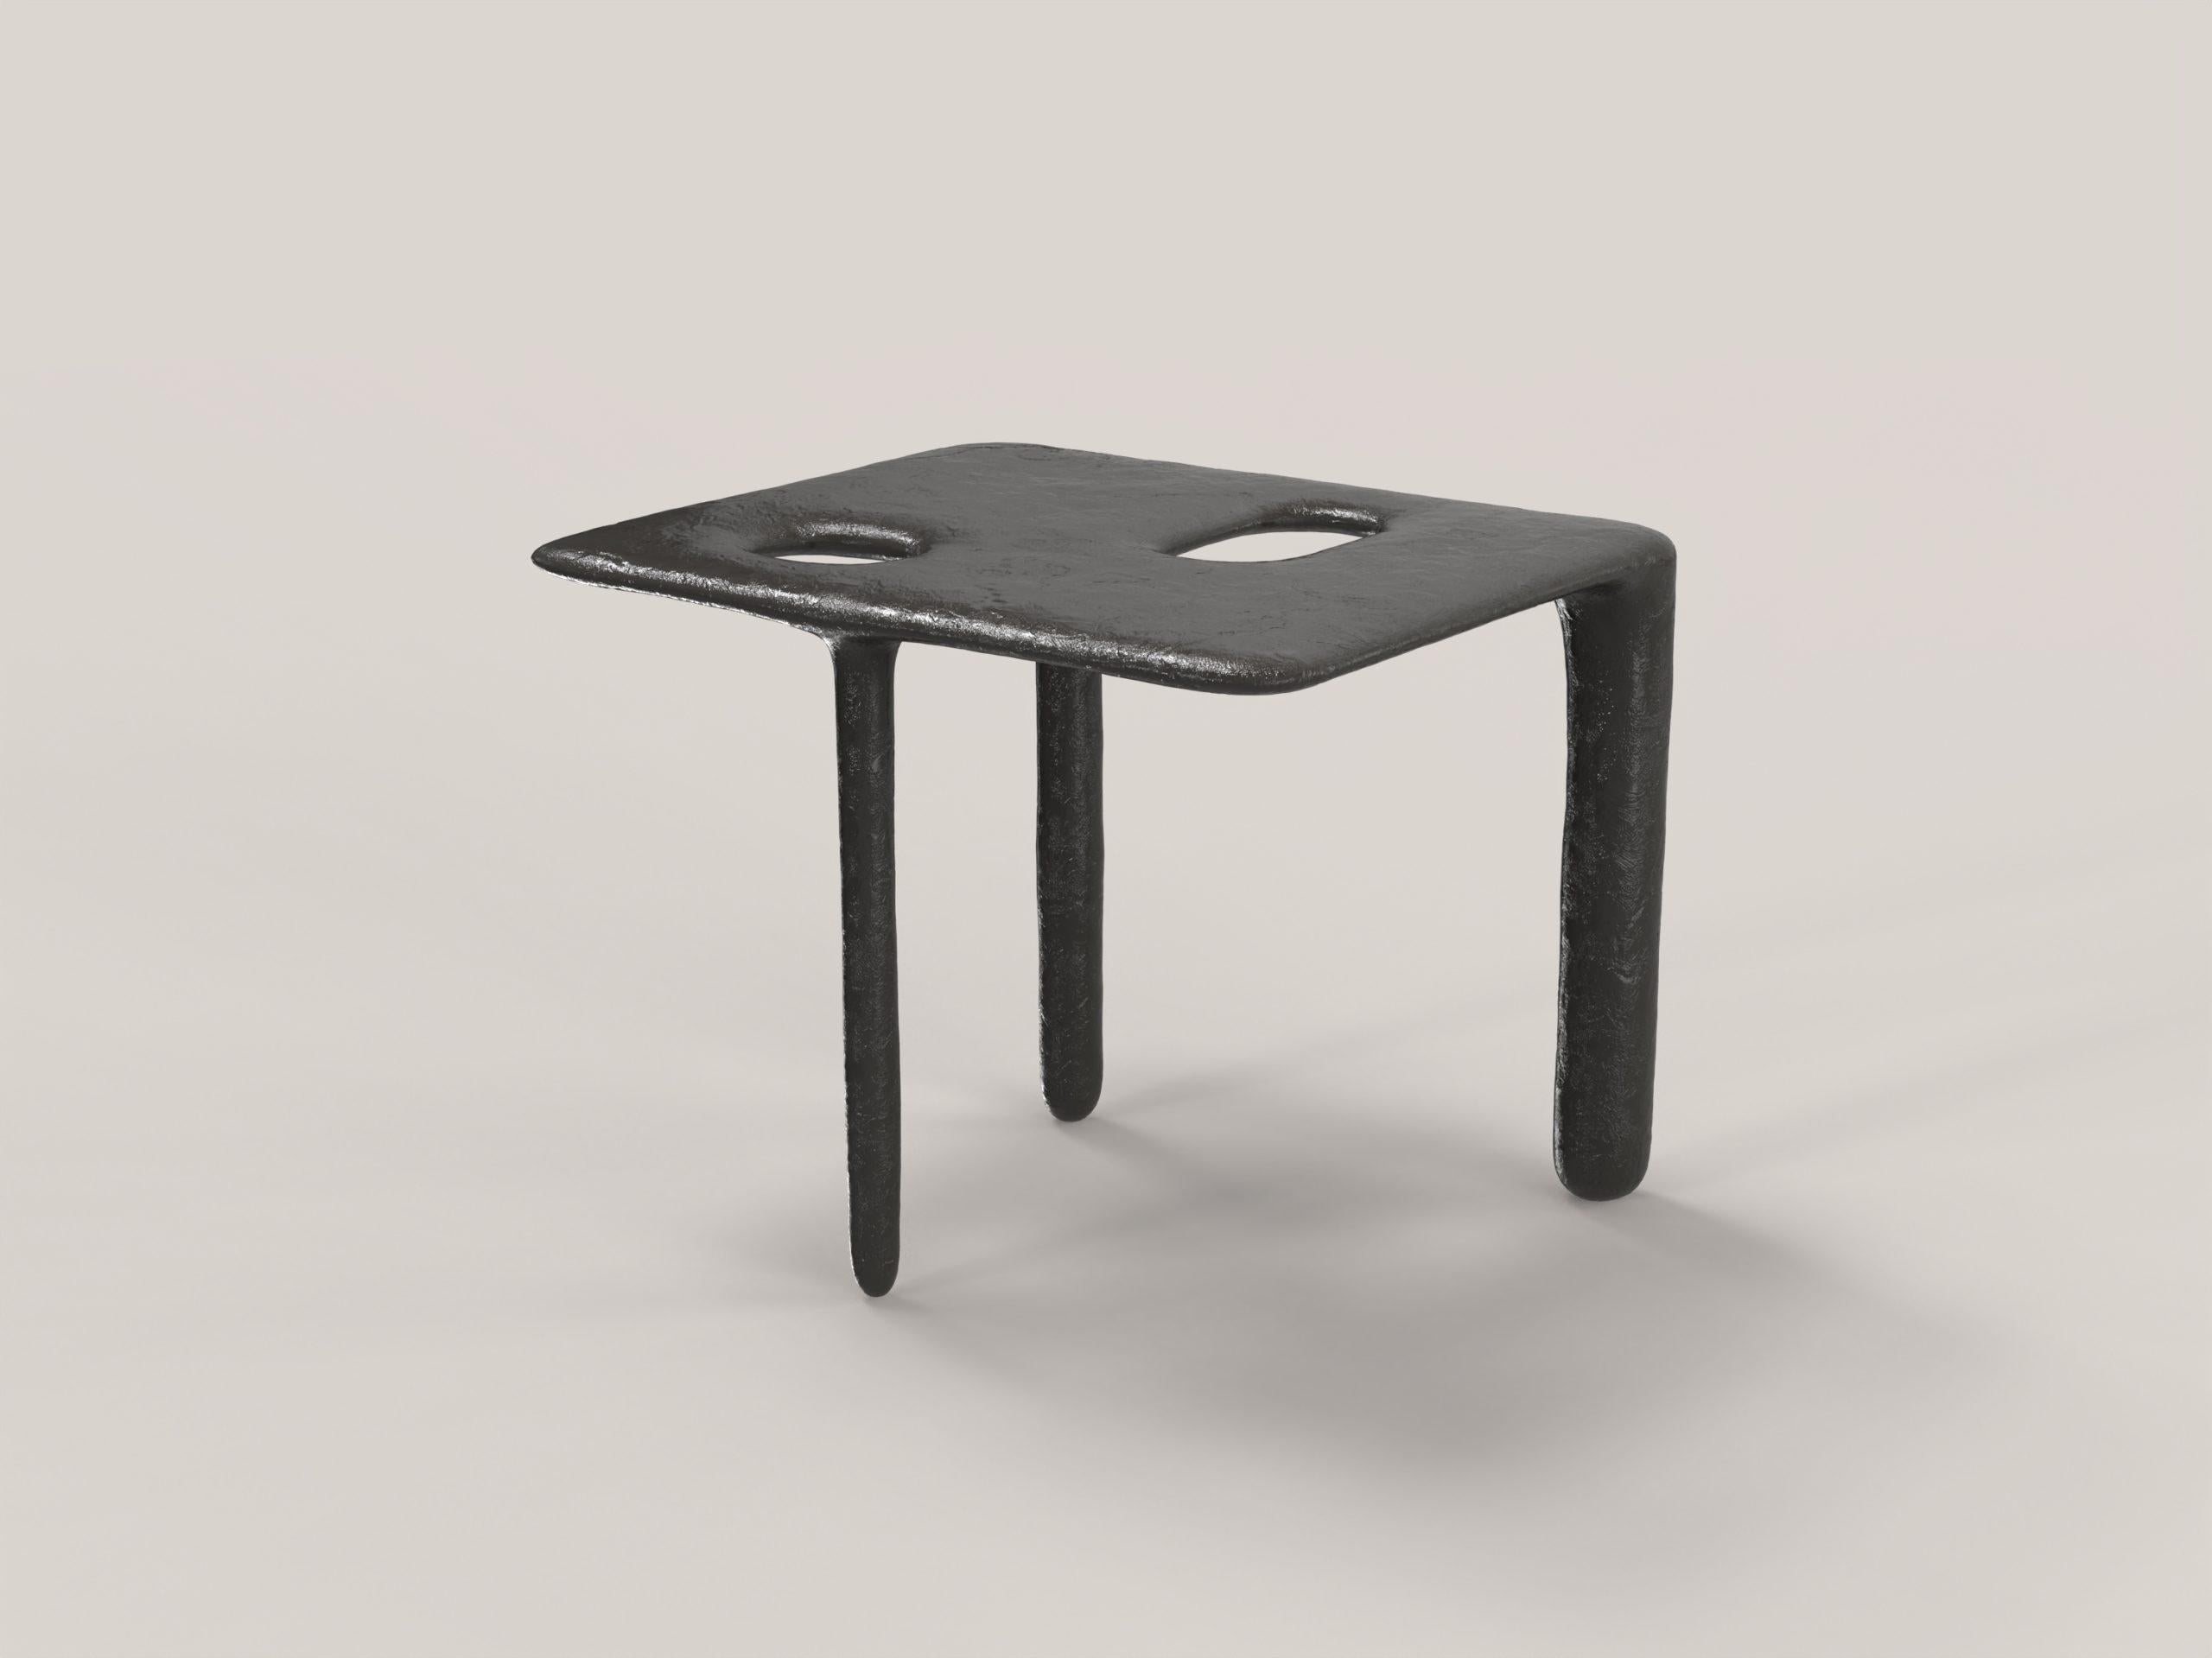 Oasi V1 low table by Edizione Limitata
Limited Edition of 15 + 3 pieces. Signed and numbered.
Dimensions: D 38 x W 45 x H 36 cm.
Materials: cast bronze.

Edizione Limitata, that is to say “Limited Edition”, is a brand promoting and developing